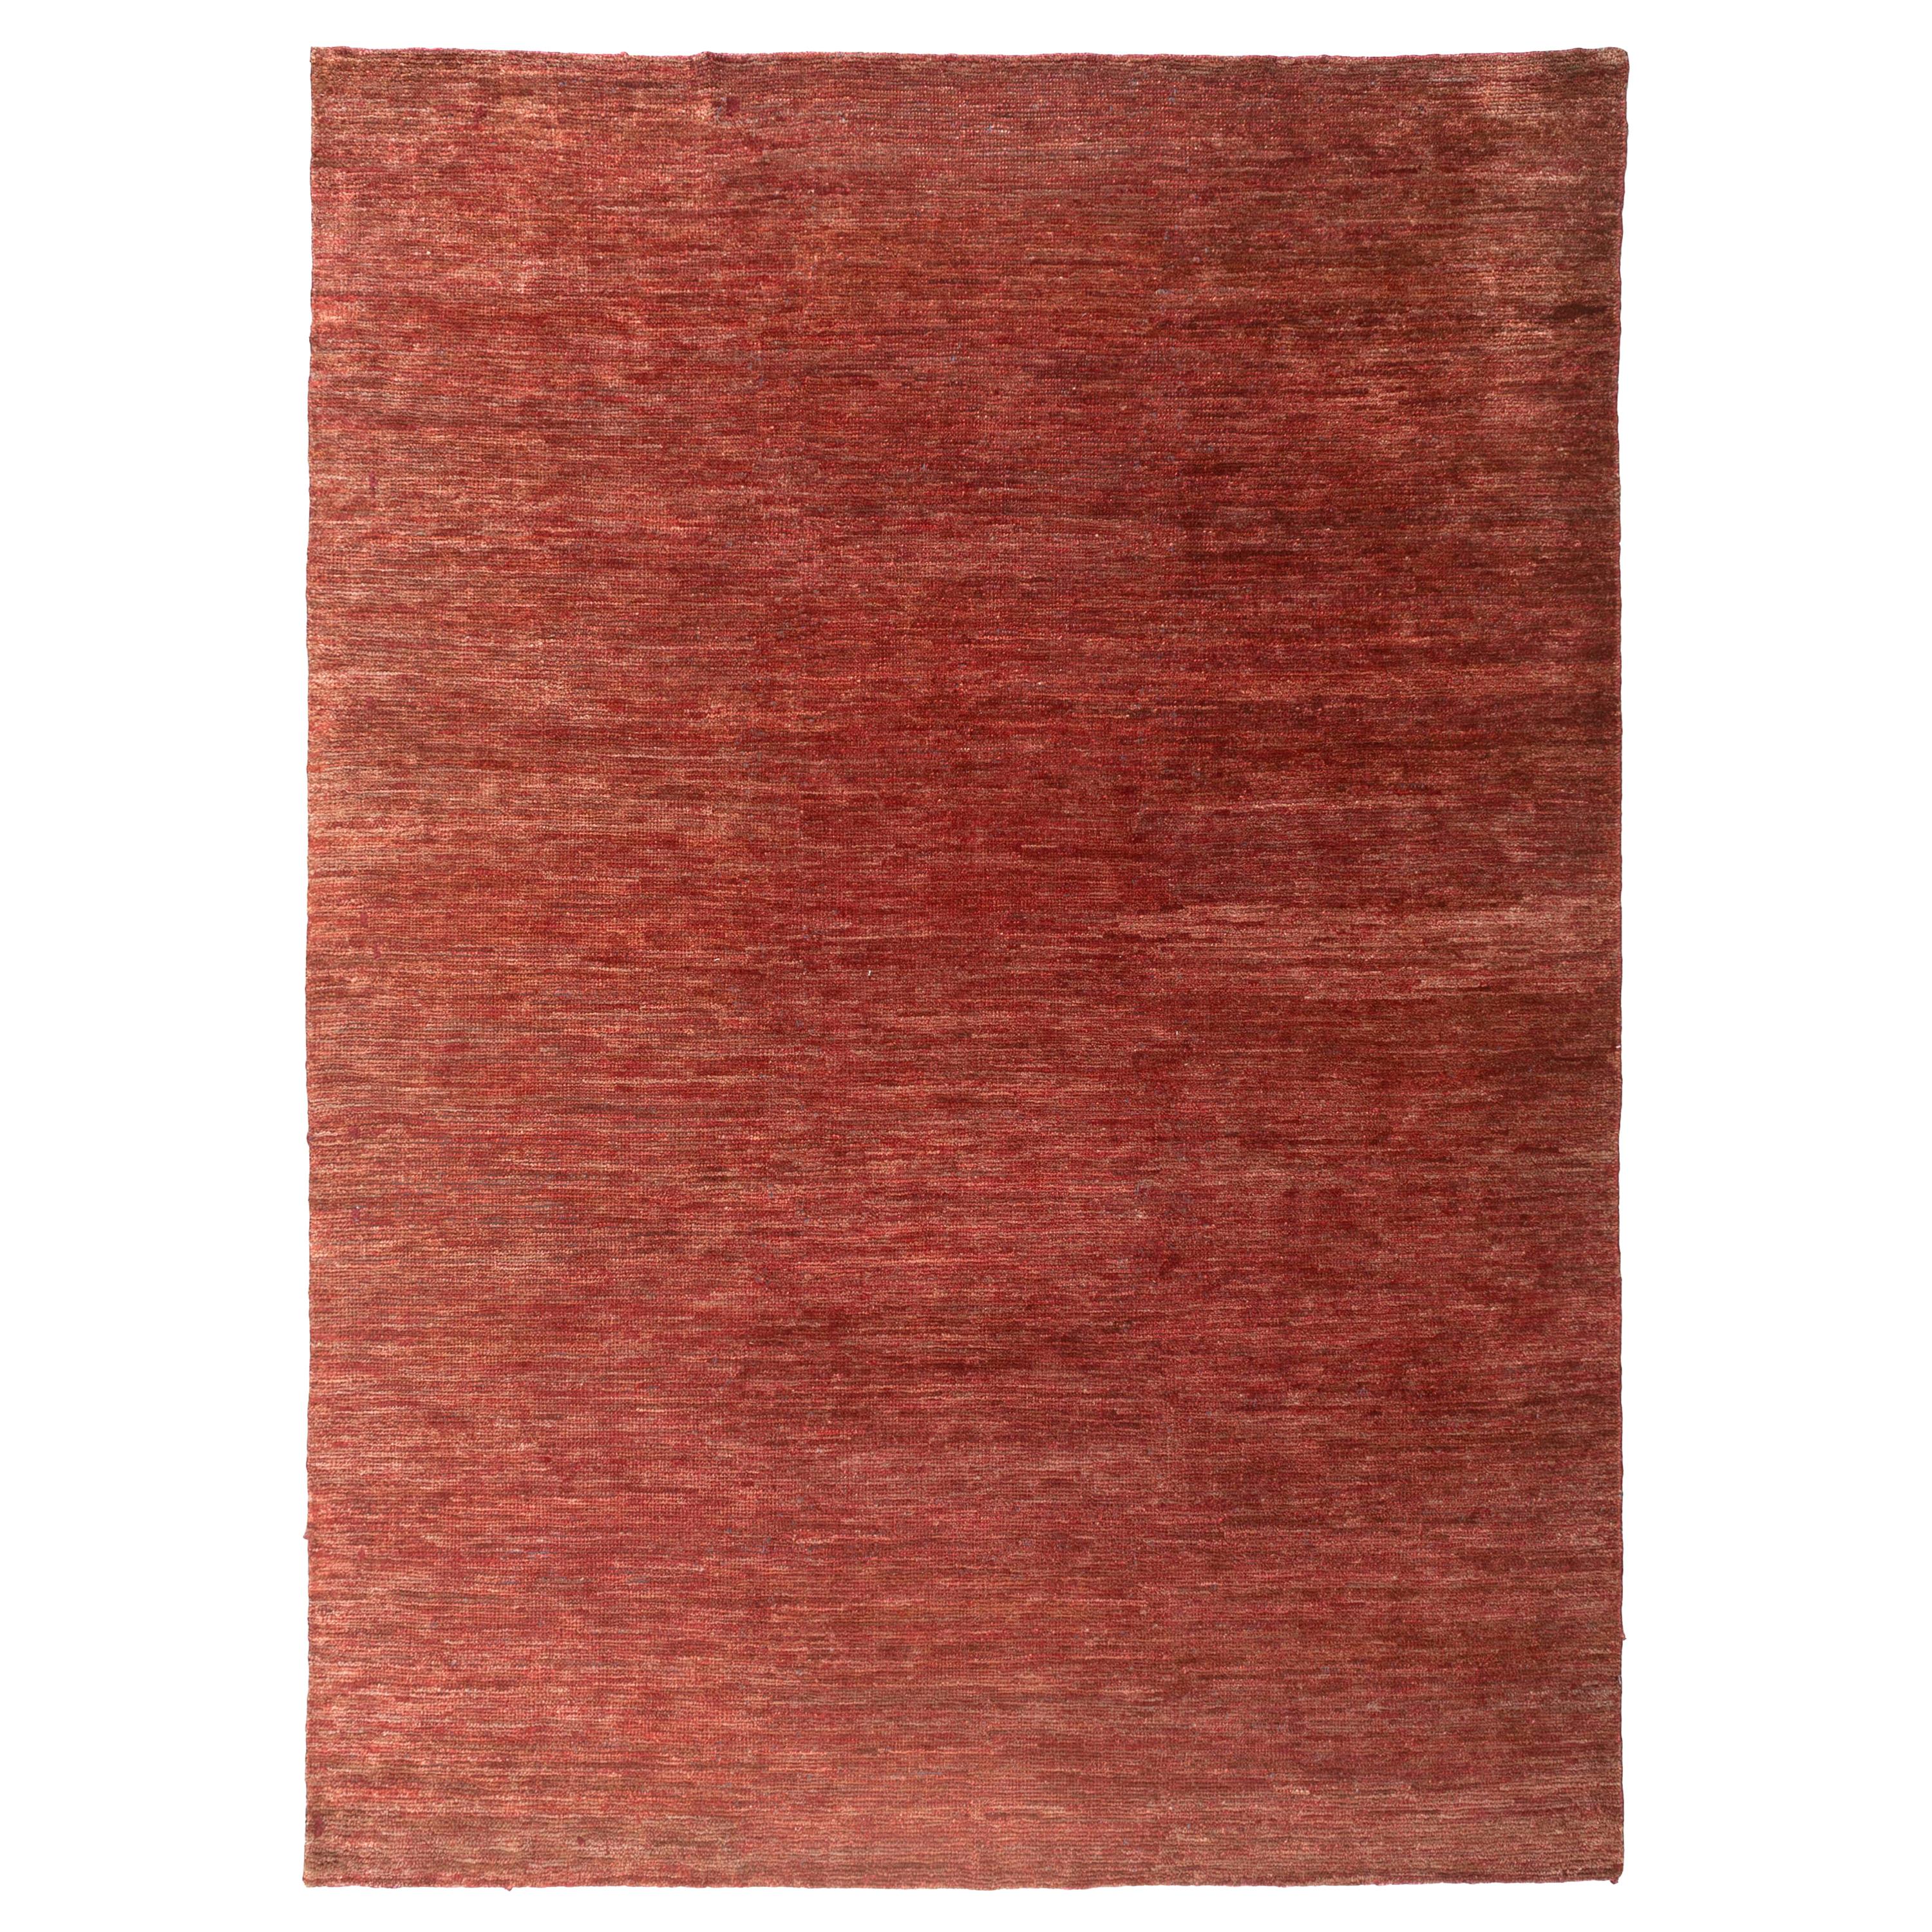 Red Jute Area Rug For Sale